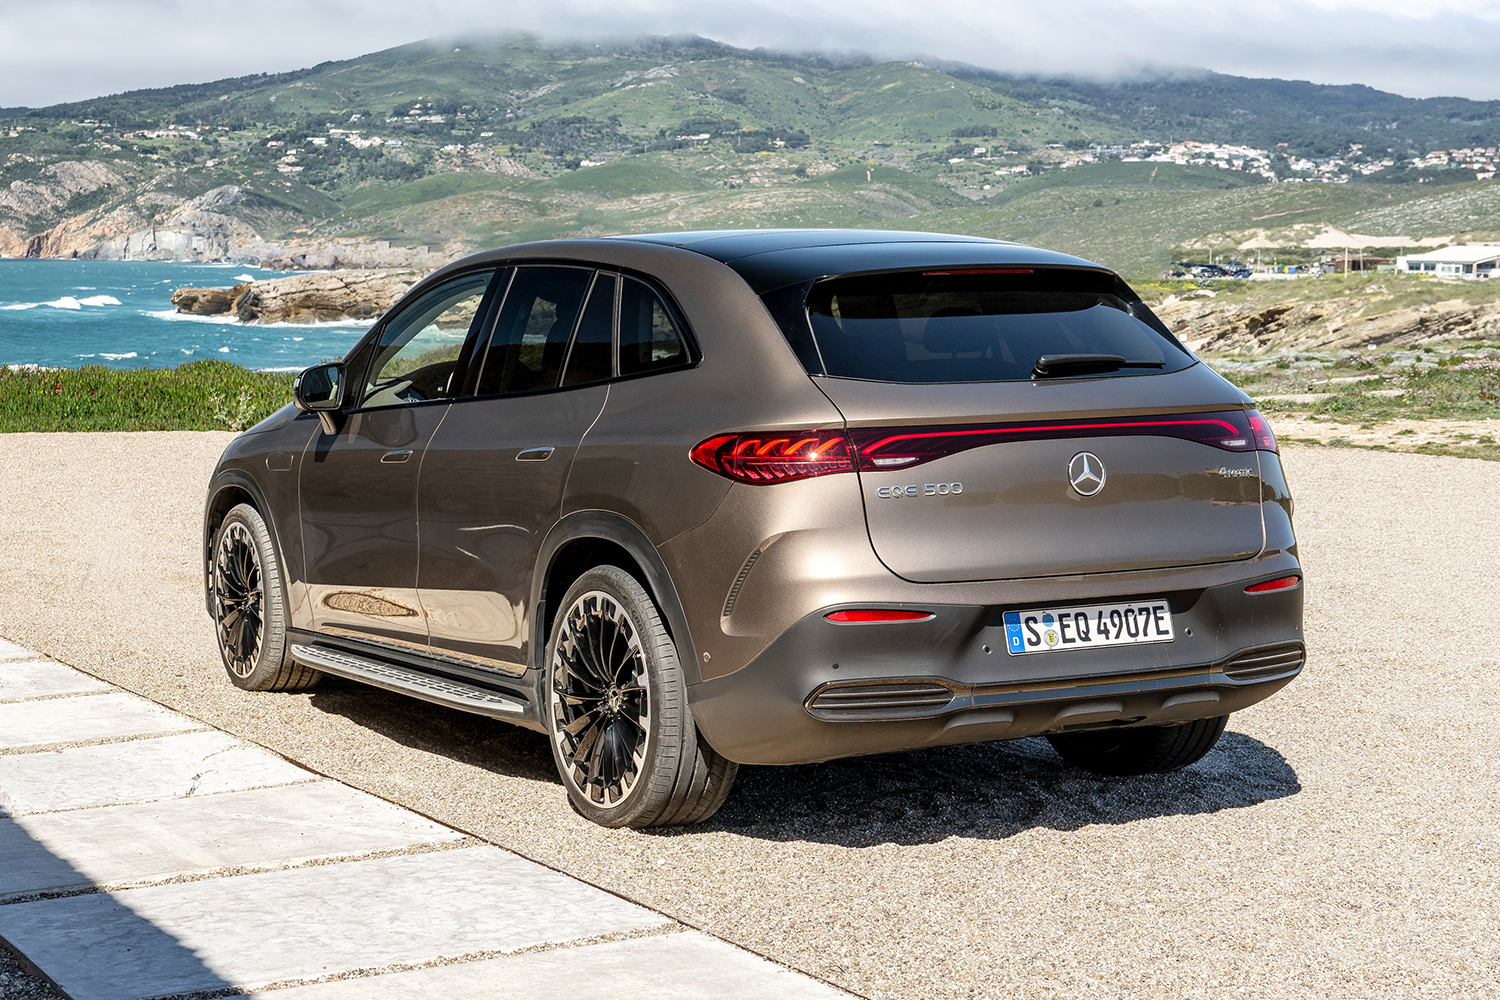 The rear of the Mercedes-Benz EQE SUV